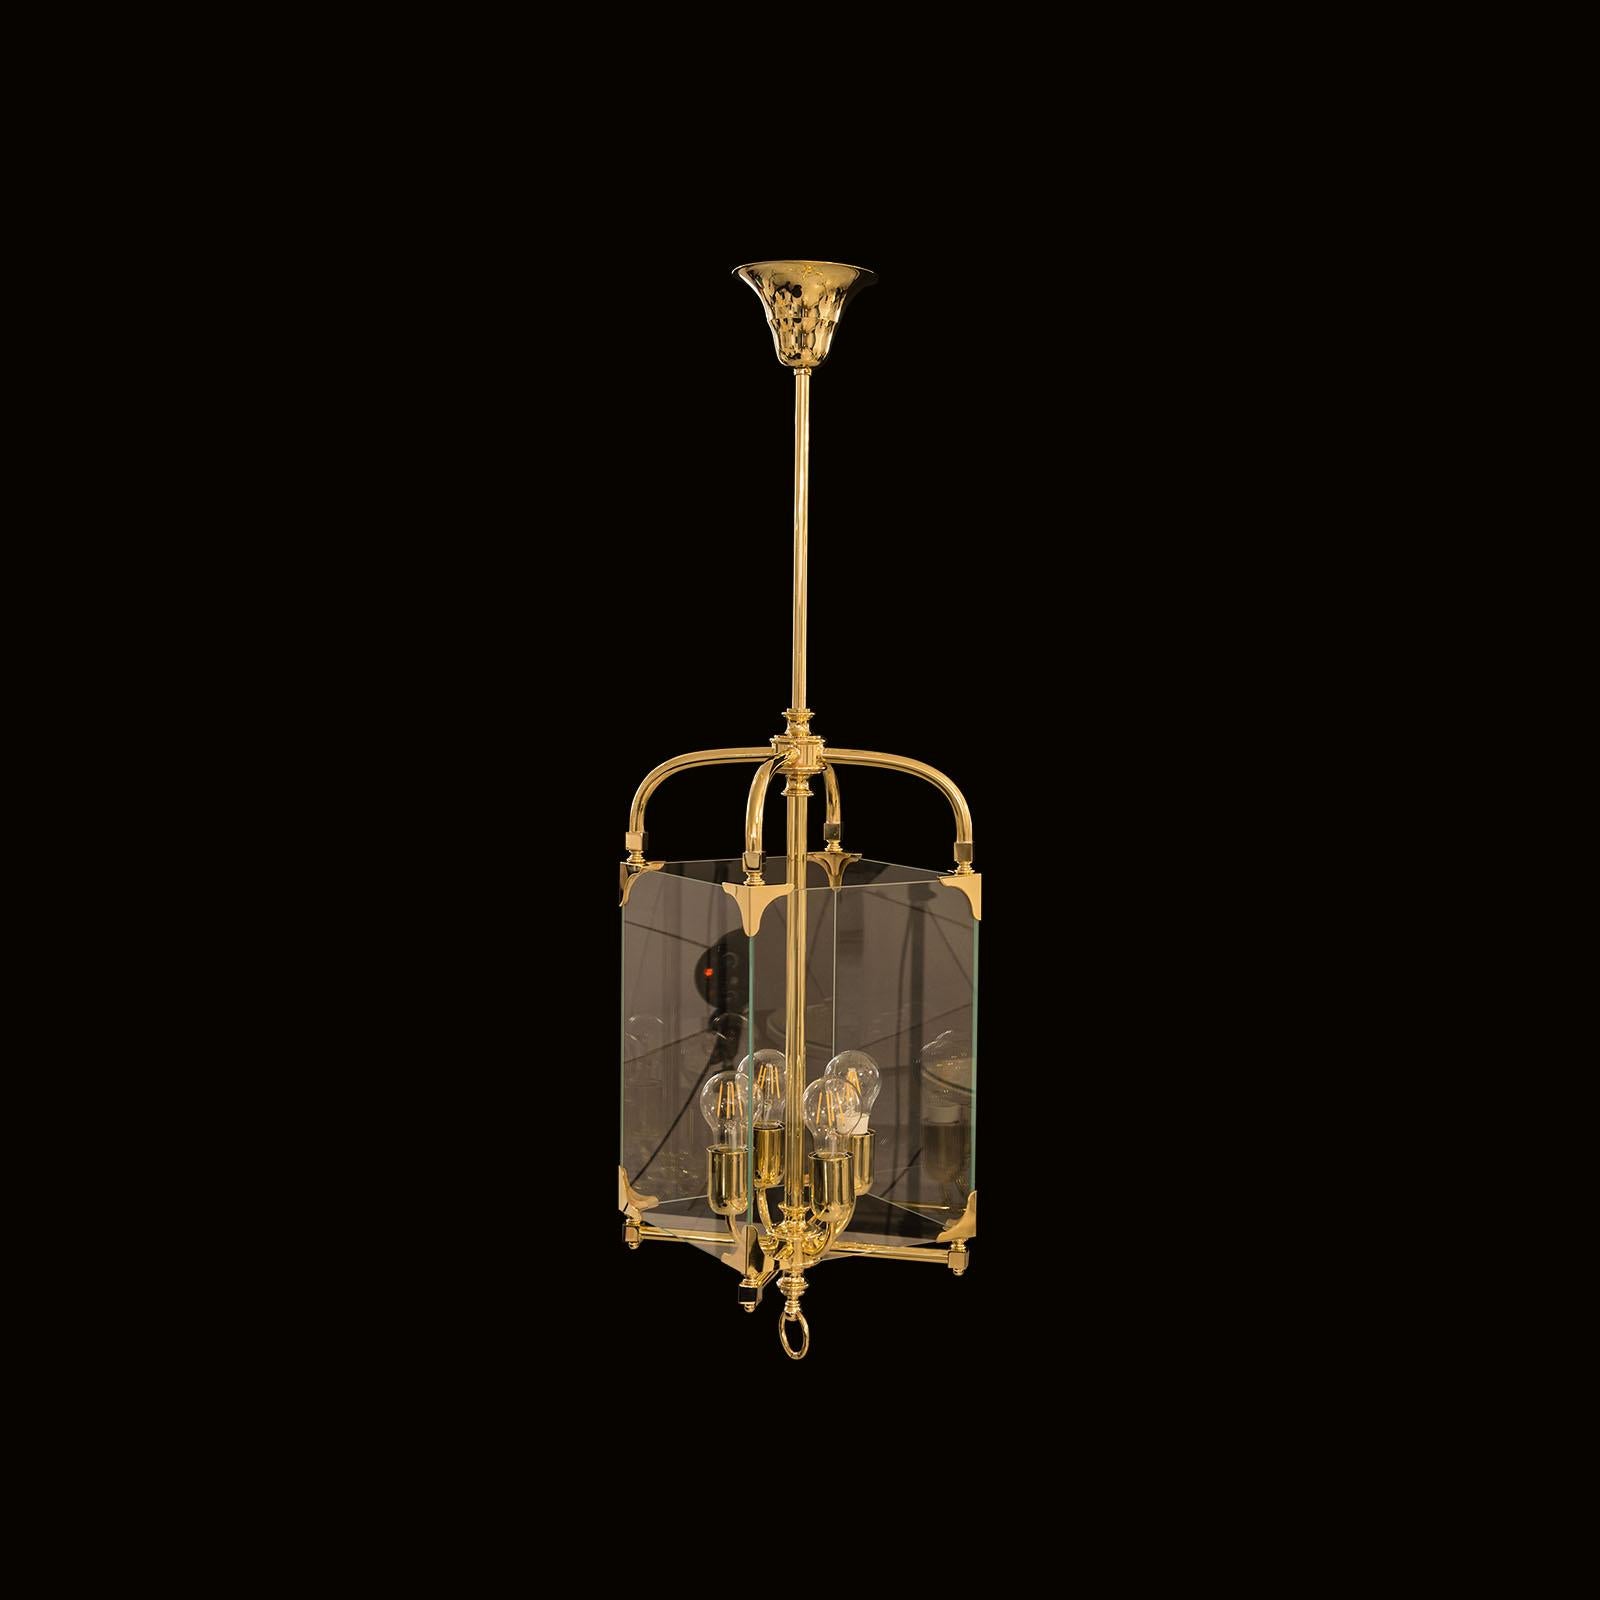 Vienna Secession Adolf Loos Secession Jugendstil Glass and Brass Lantern Chandelier Re-Edition For Sale